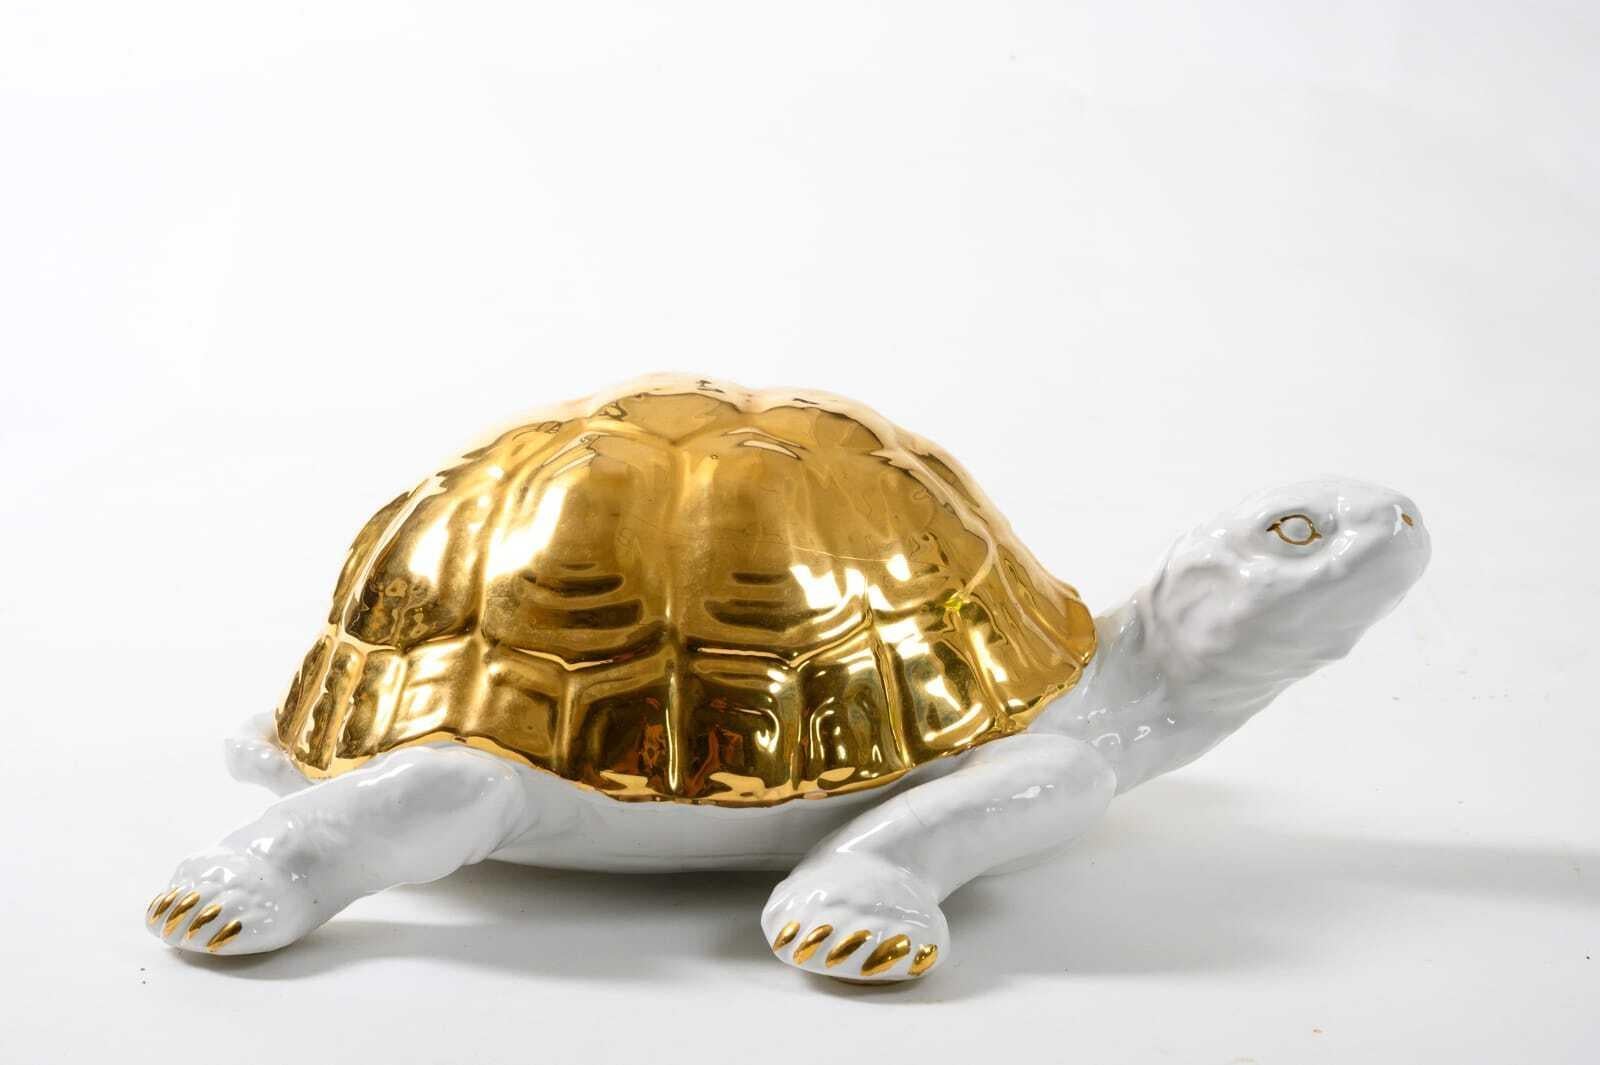 Italian Ceramic Tortoise with Gold Detailing by Ronzan